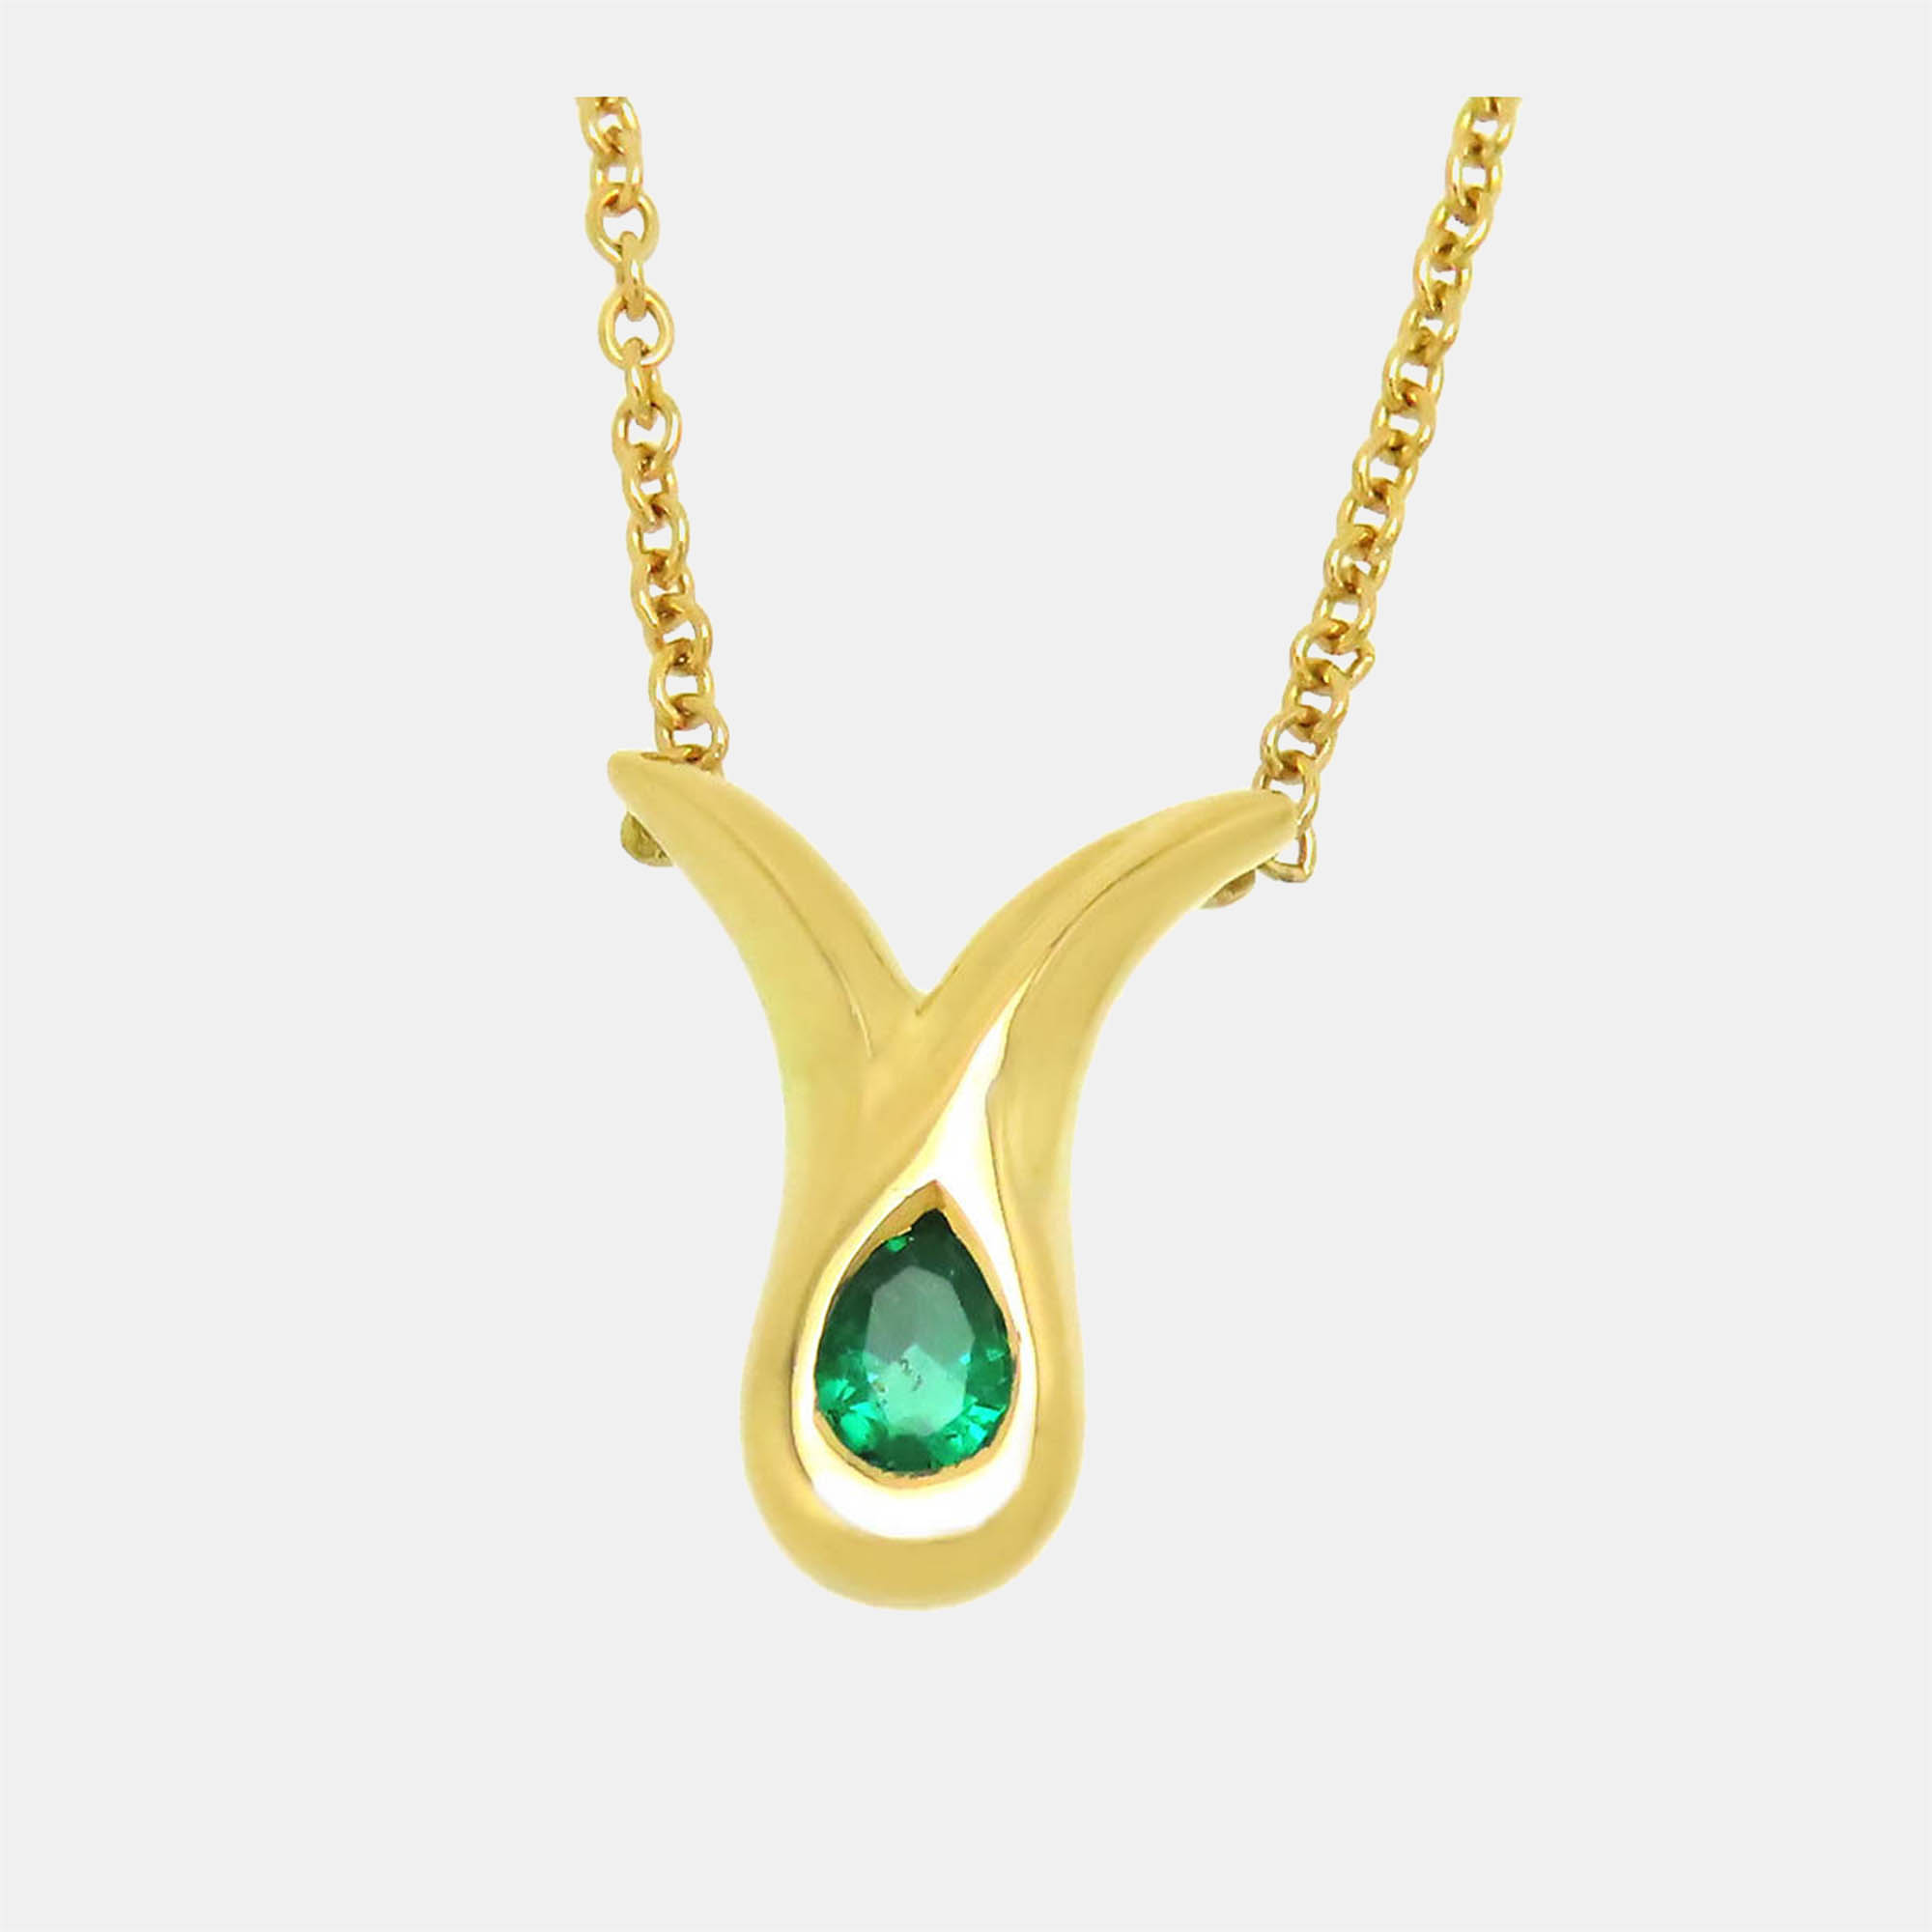 Tiffany & Co.  Yellow Gold Necklace